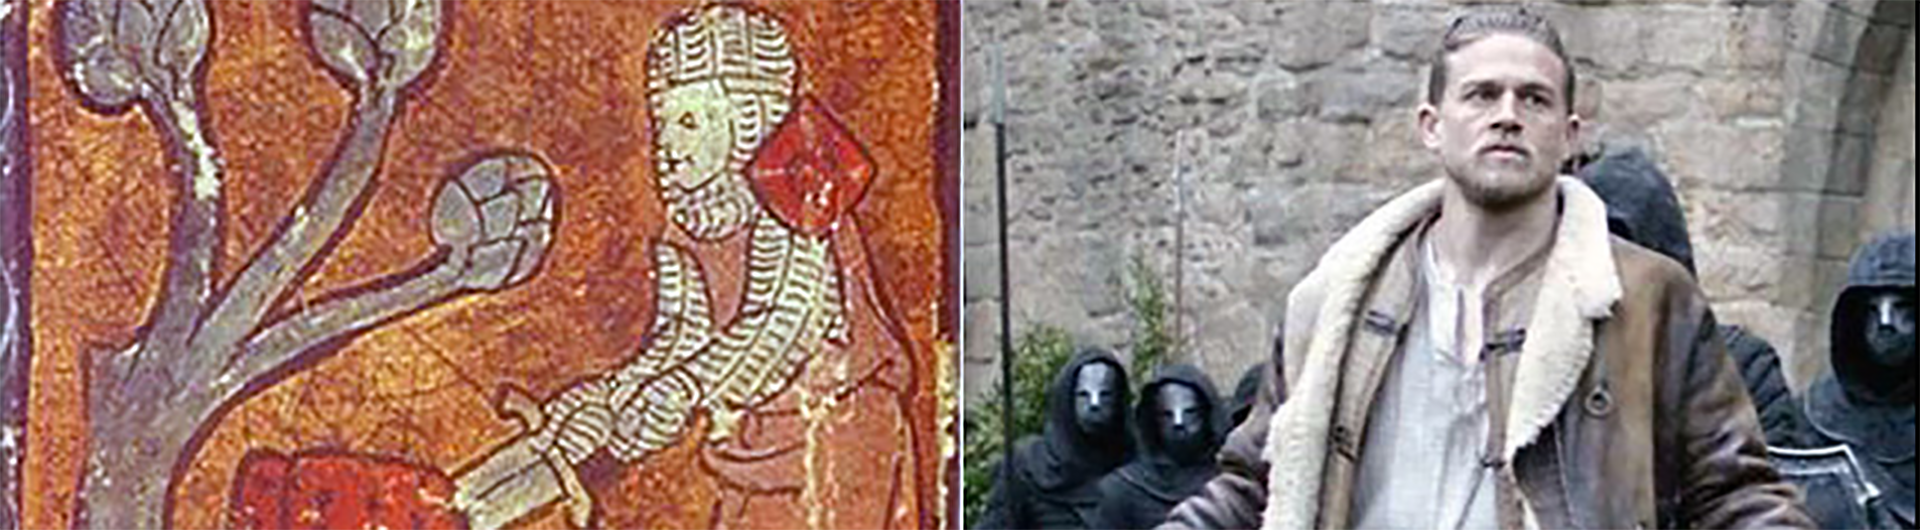 Medieval art of man with a sword juxtaposed with a modern representation of a medieval warrior